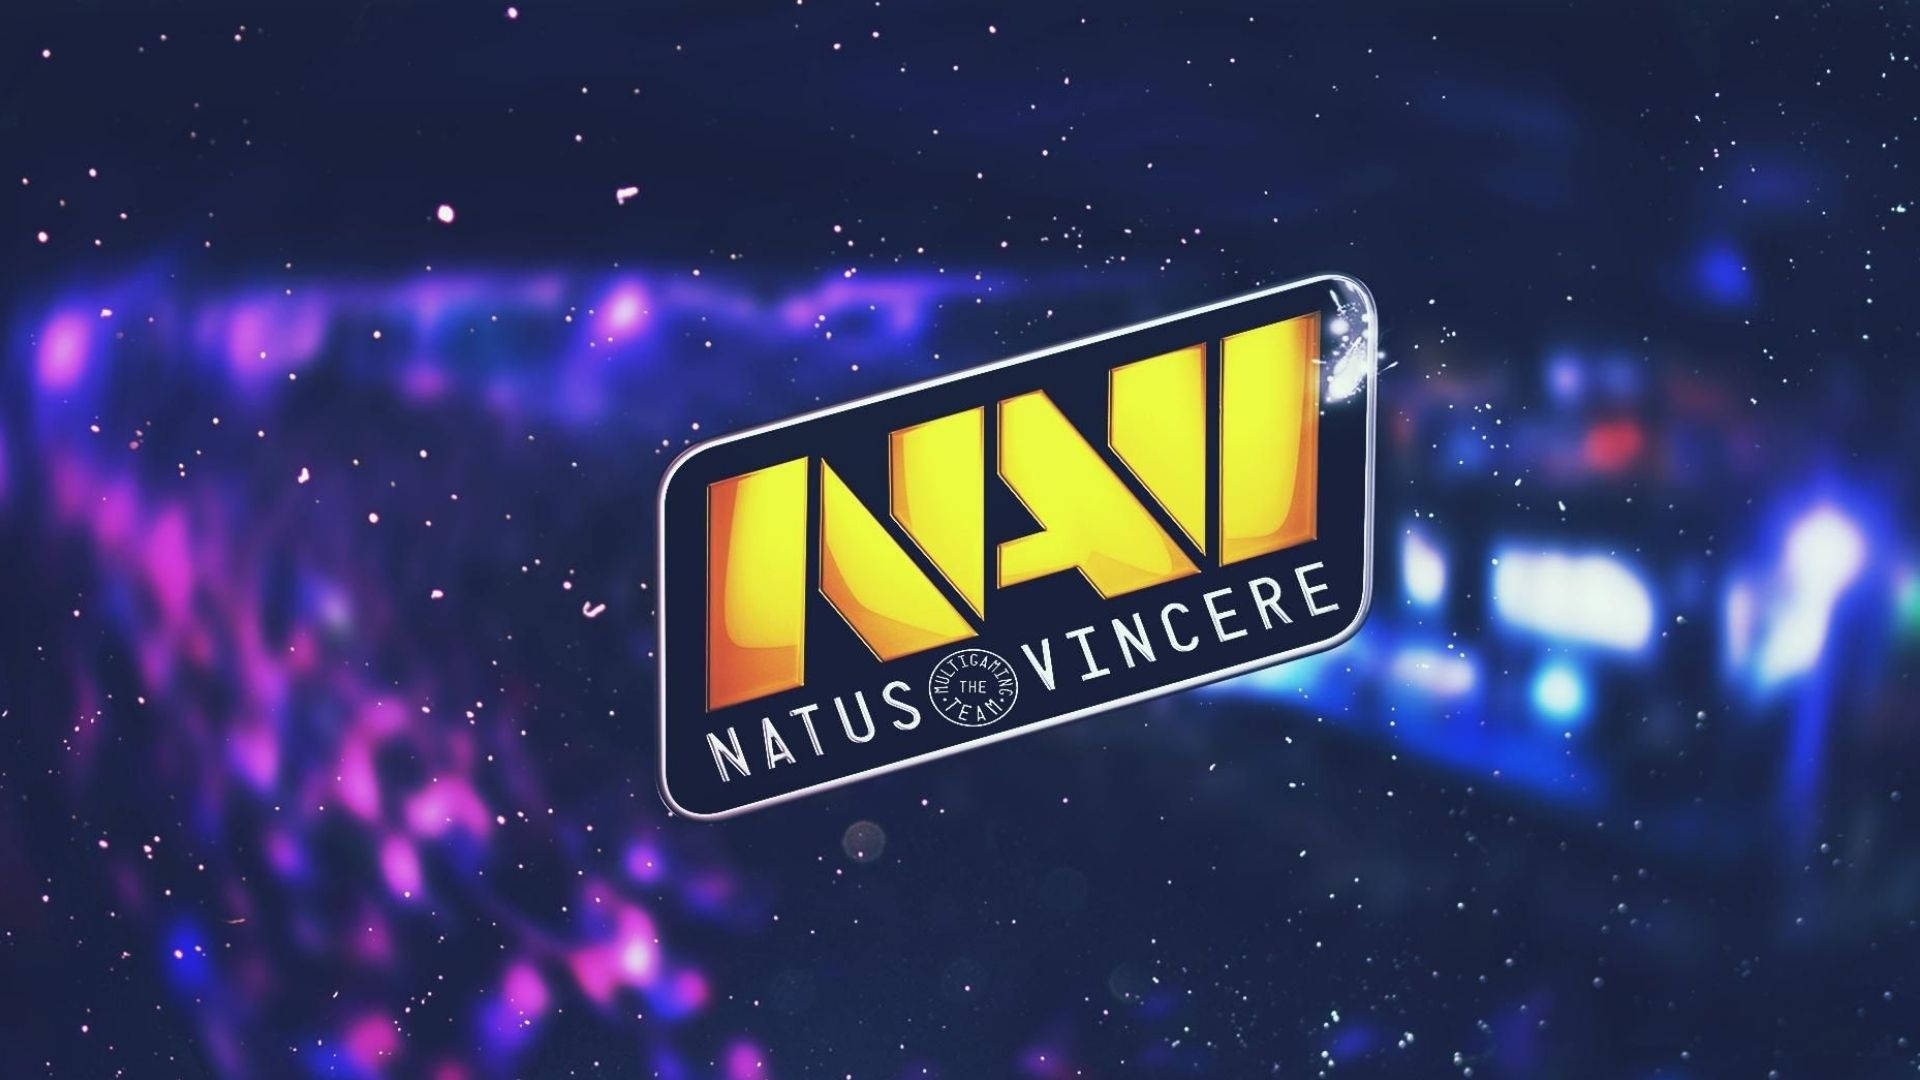 Natus Vincere Colorful Background